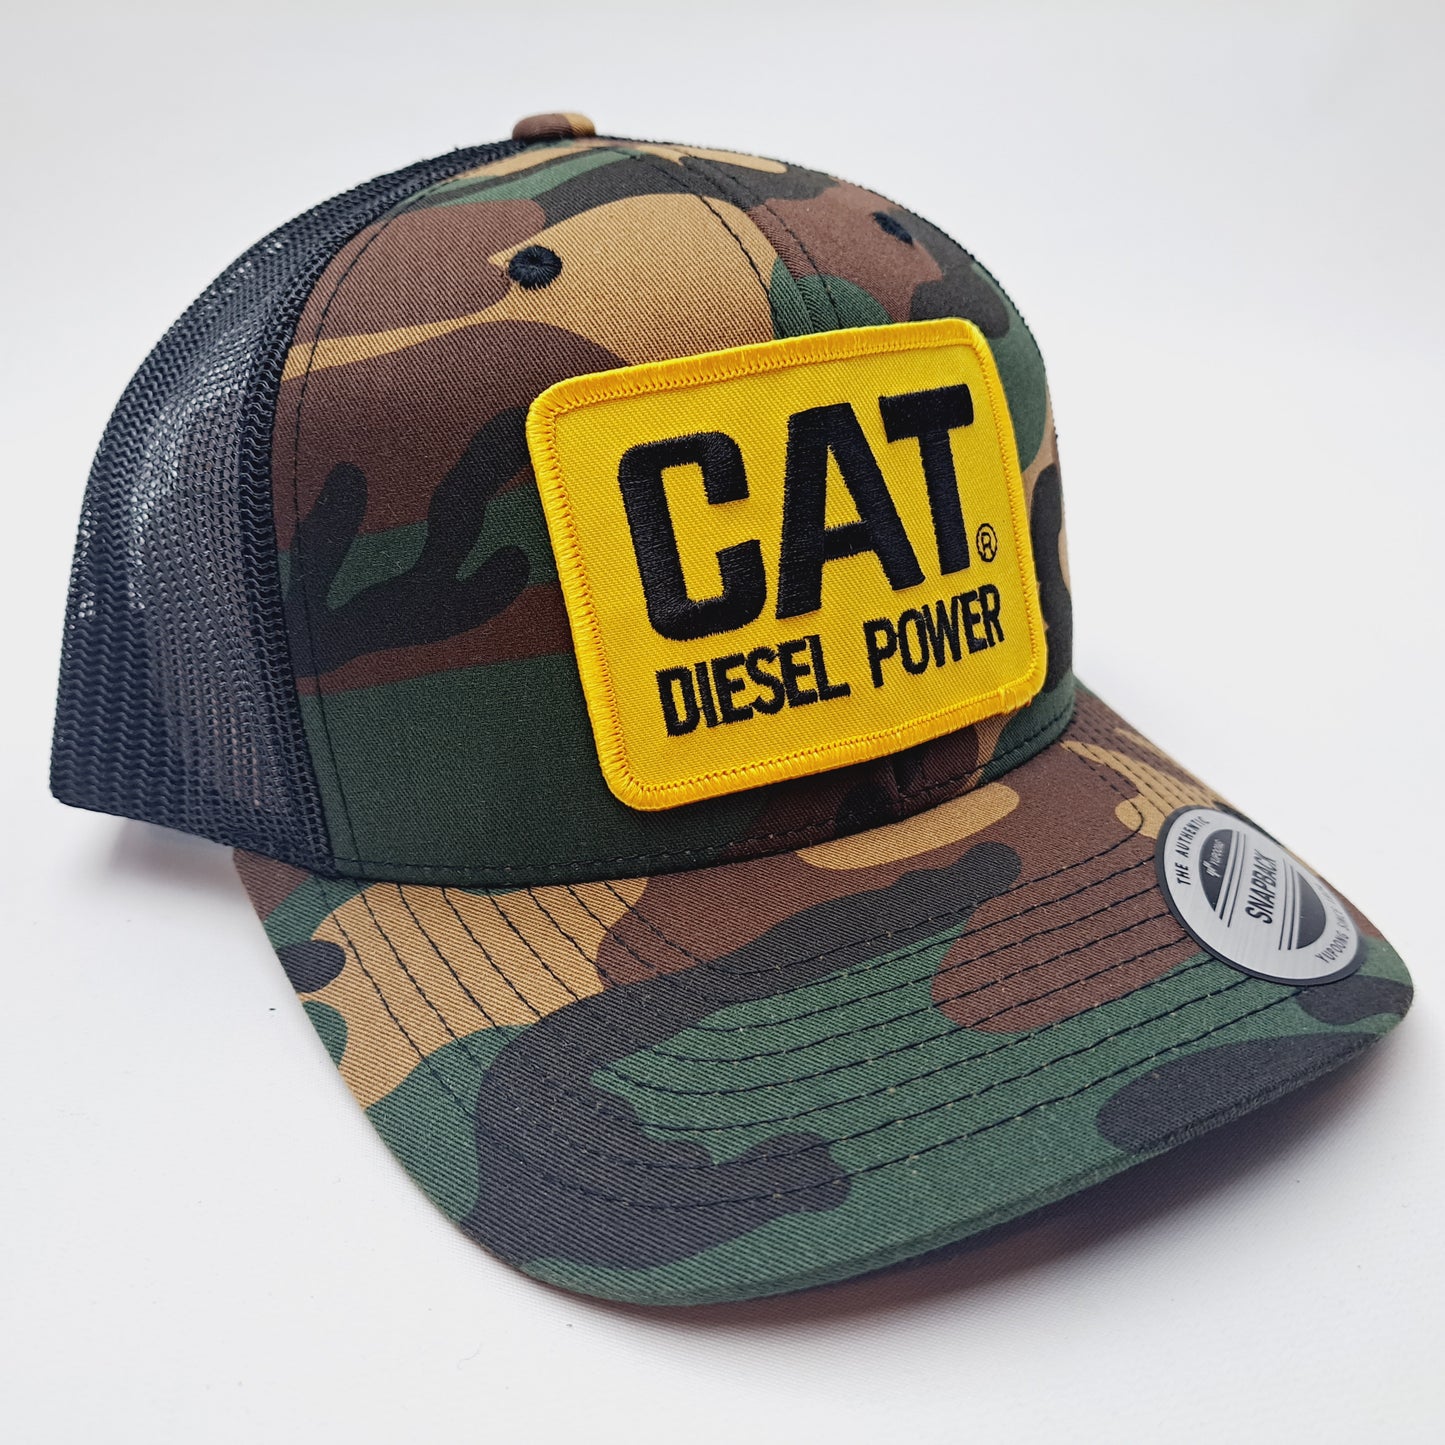 CAT Diesel Power Embroidered Patch Yupoong Curved Bill Trucker Mesh Snapback Cap Hat Camouflage